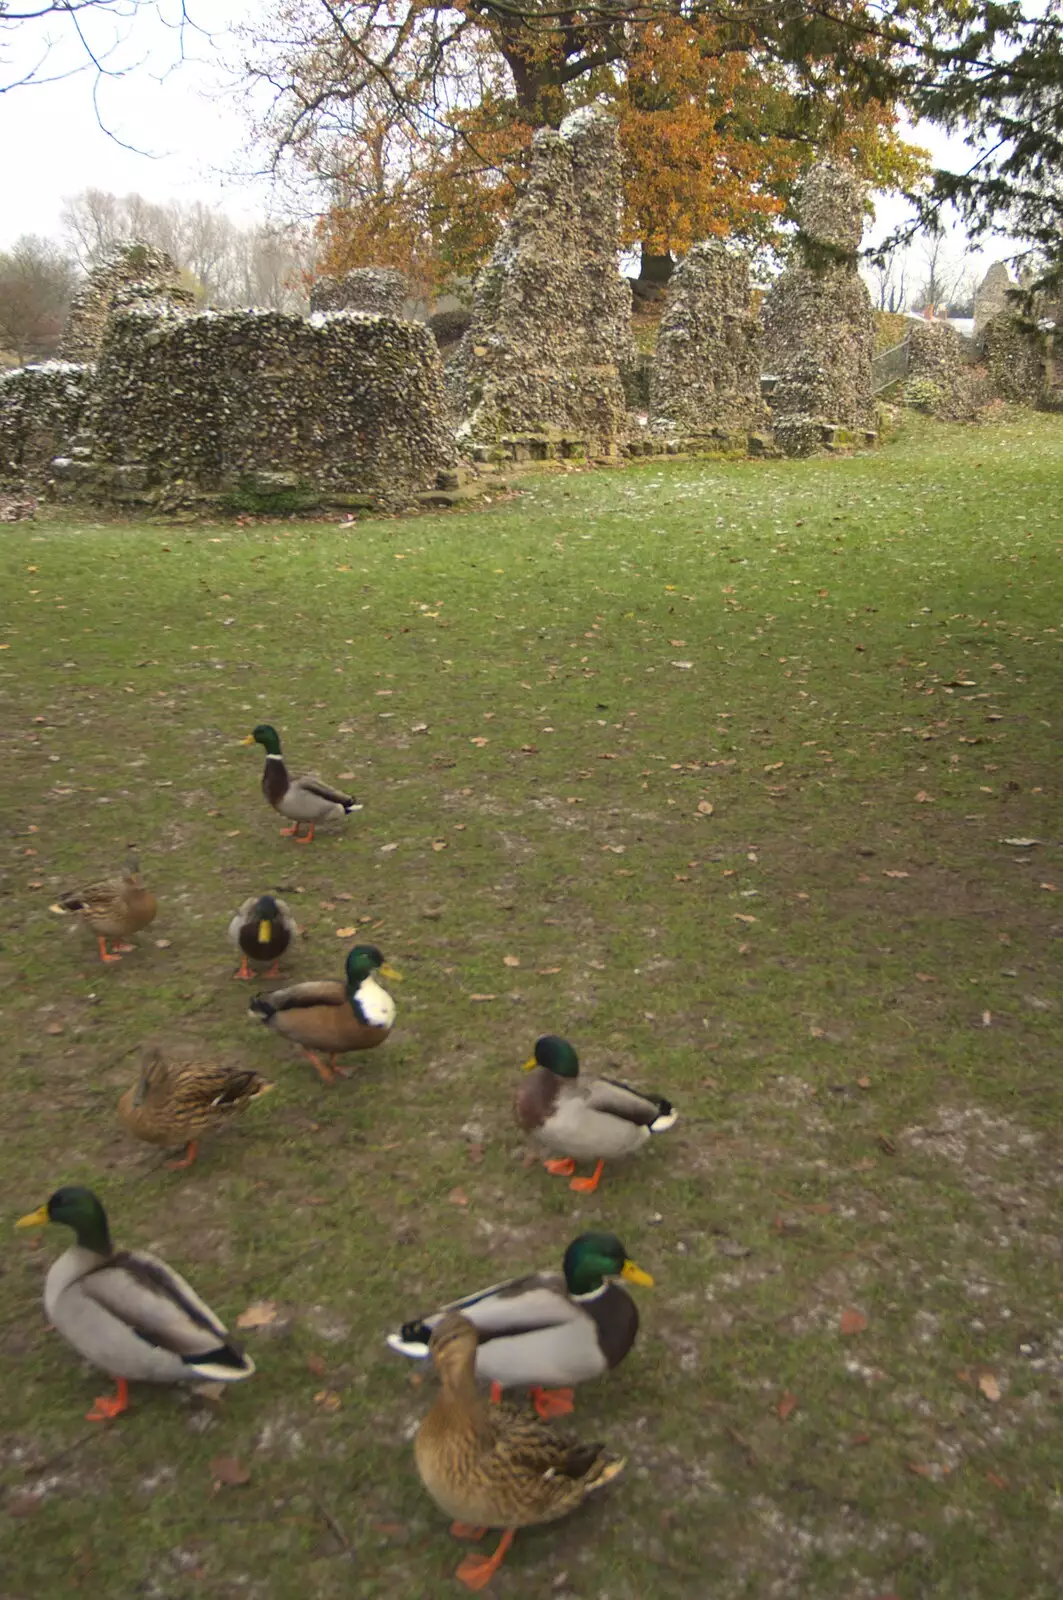 Ducks and abbey ruins in the park, from A Christmas Fair, Bury St. Edmunds, Suffolk - 28th November 2010